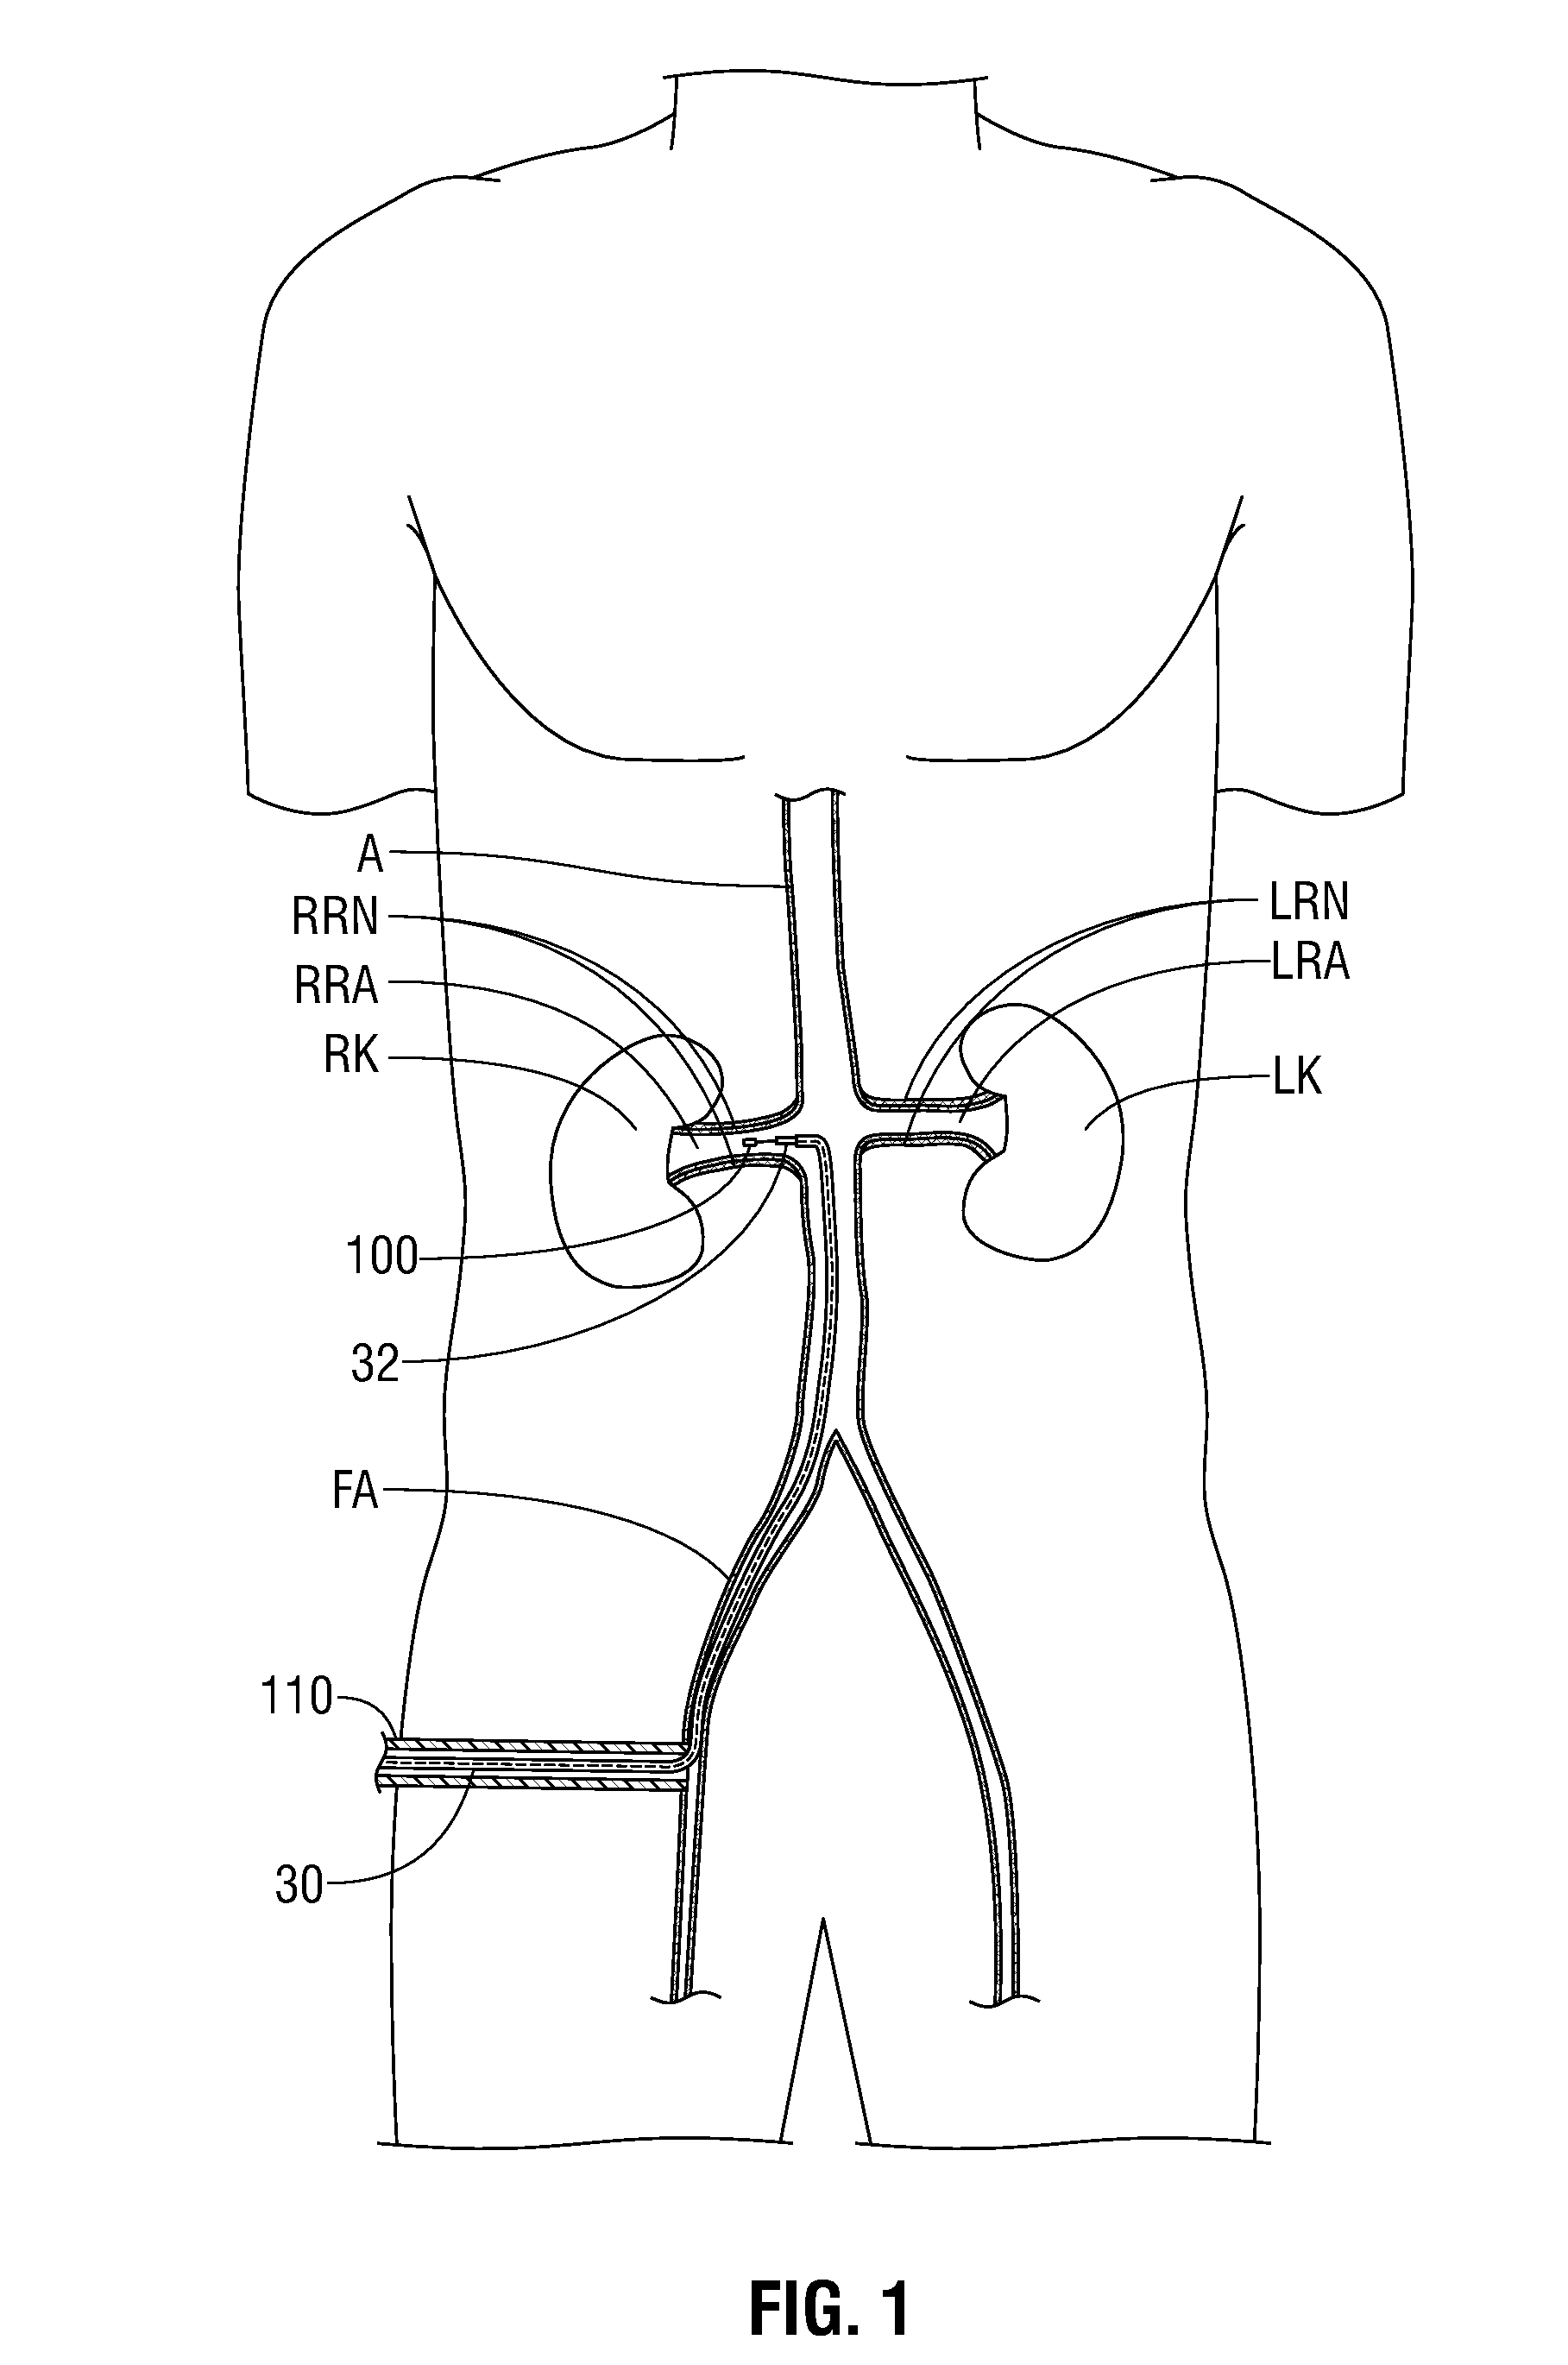 Flexible microwave catheters for natural or artificial lumens